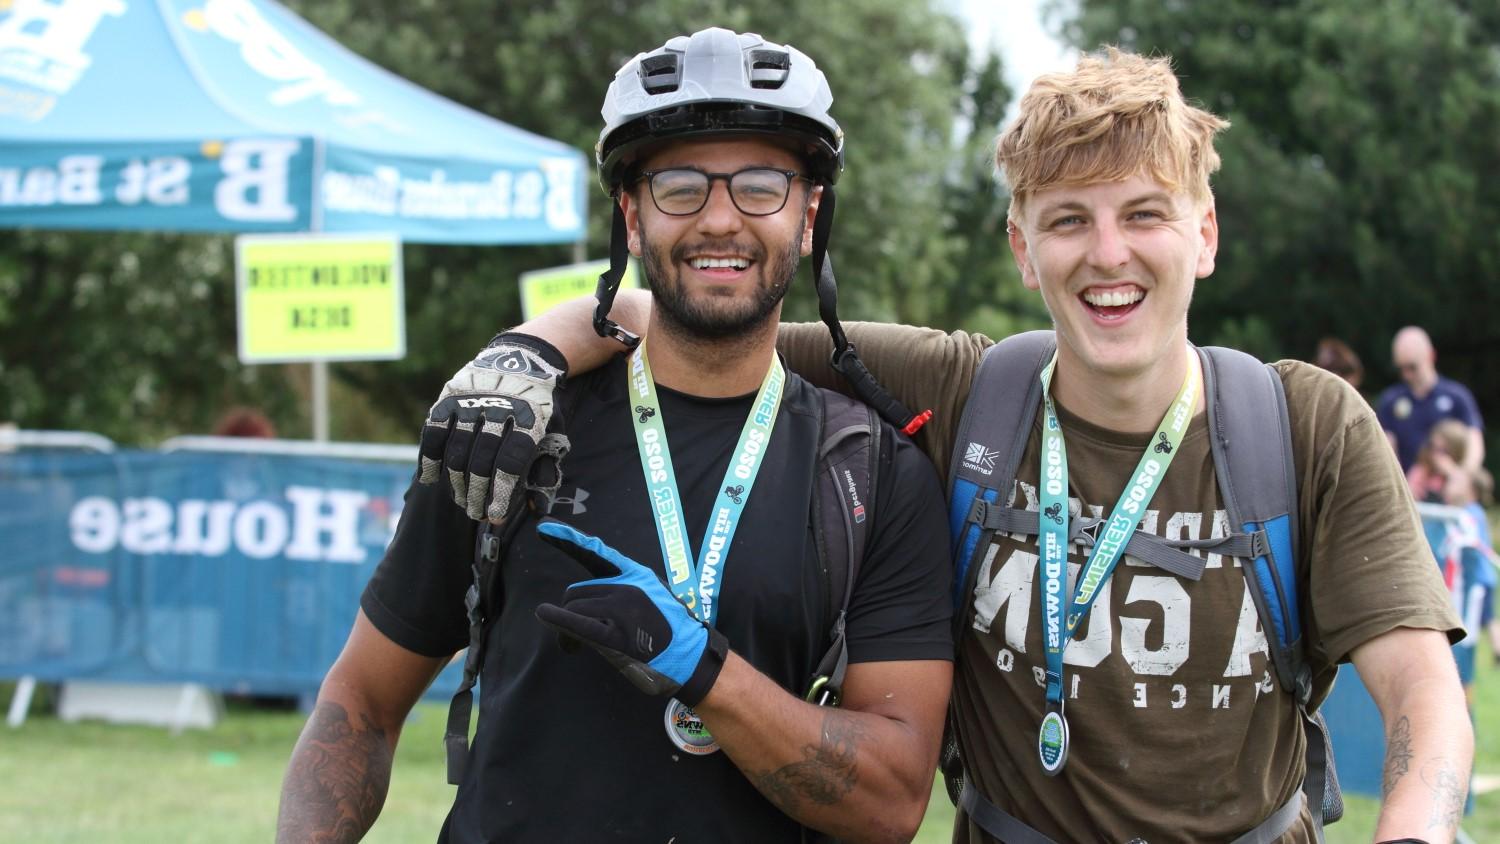 Two cyclists at Hit the downs 2020